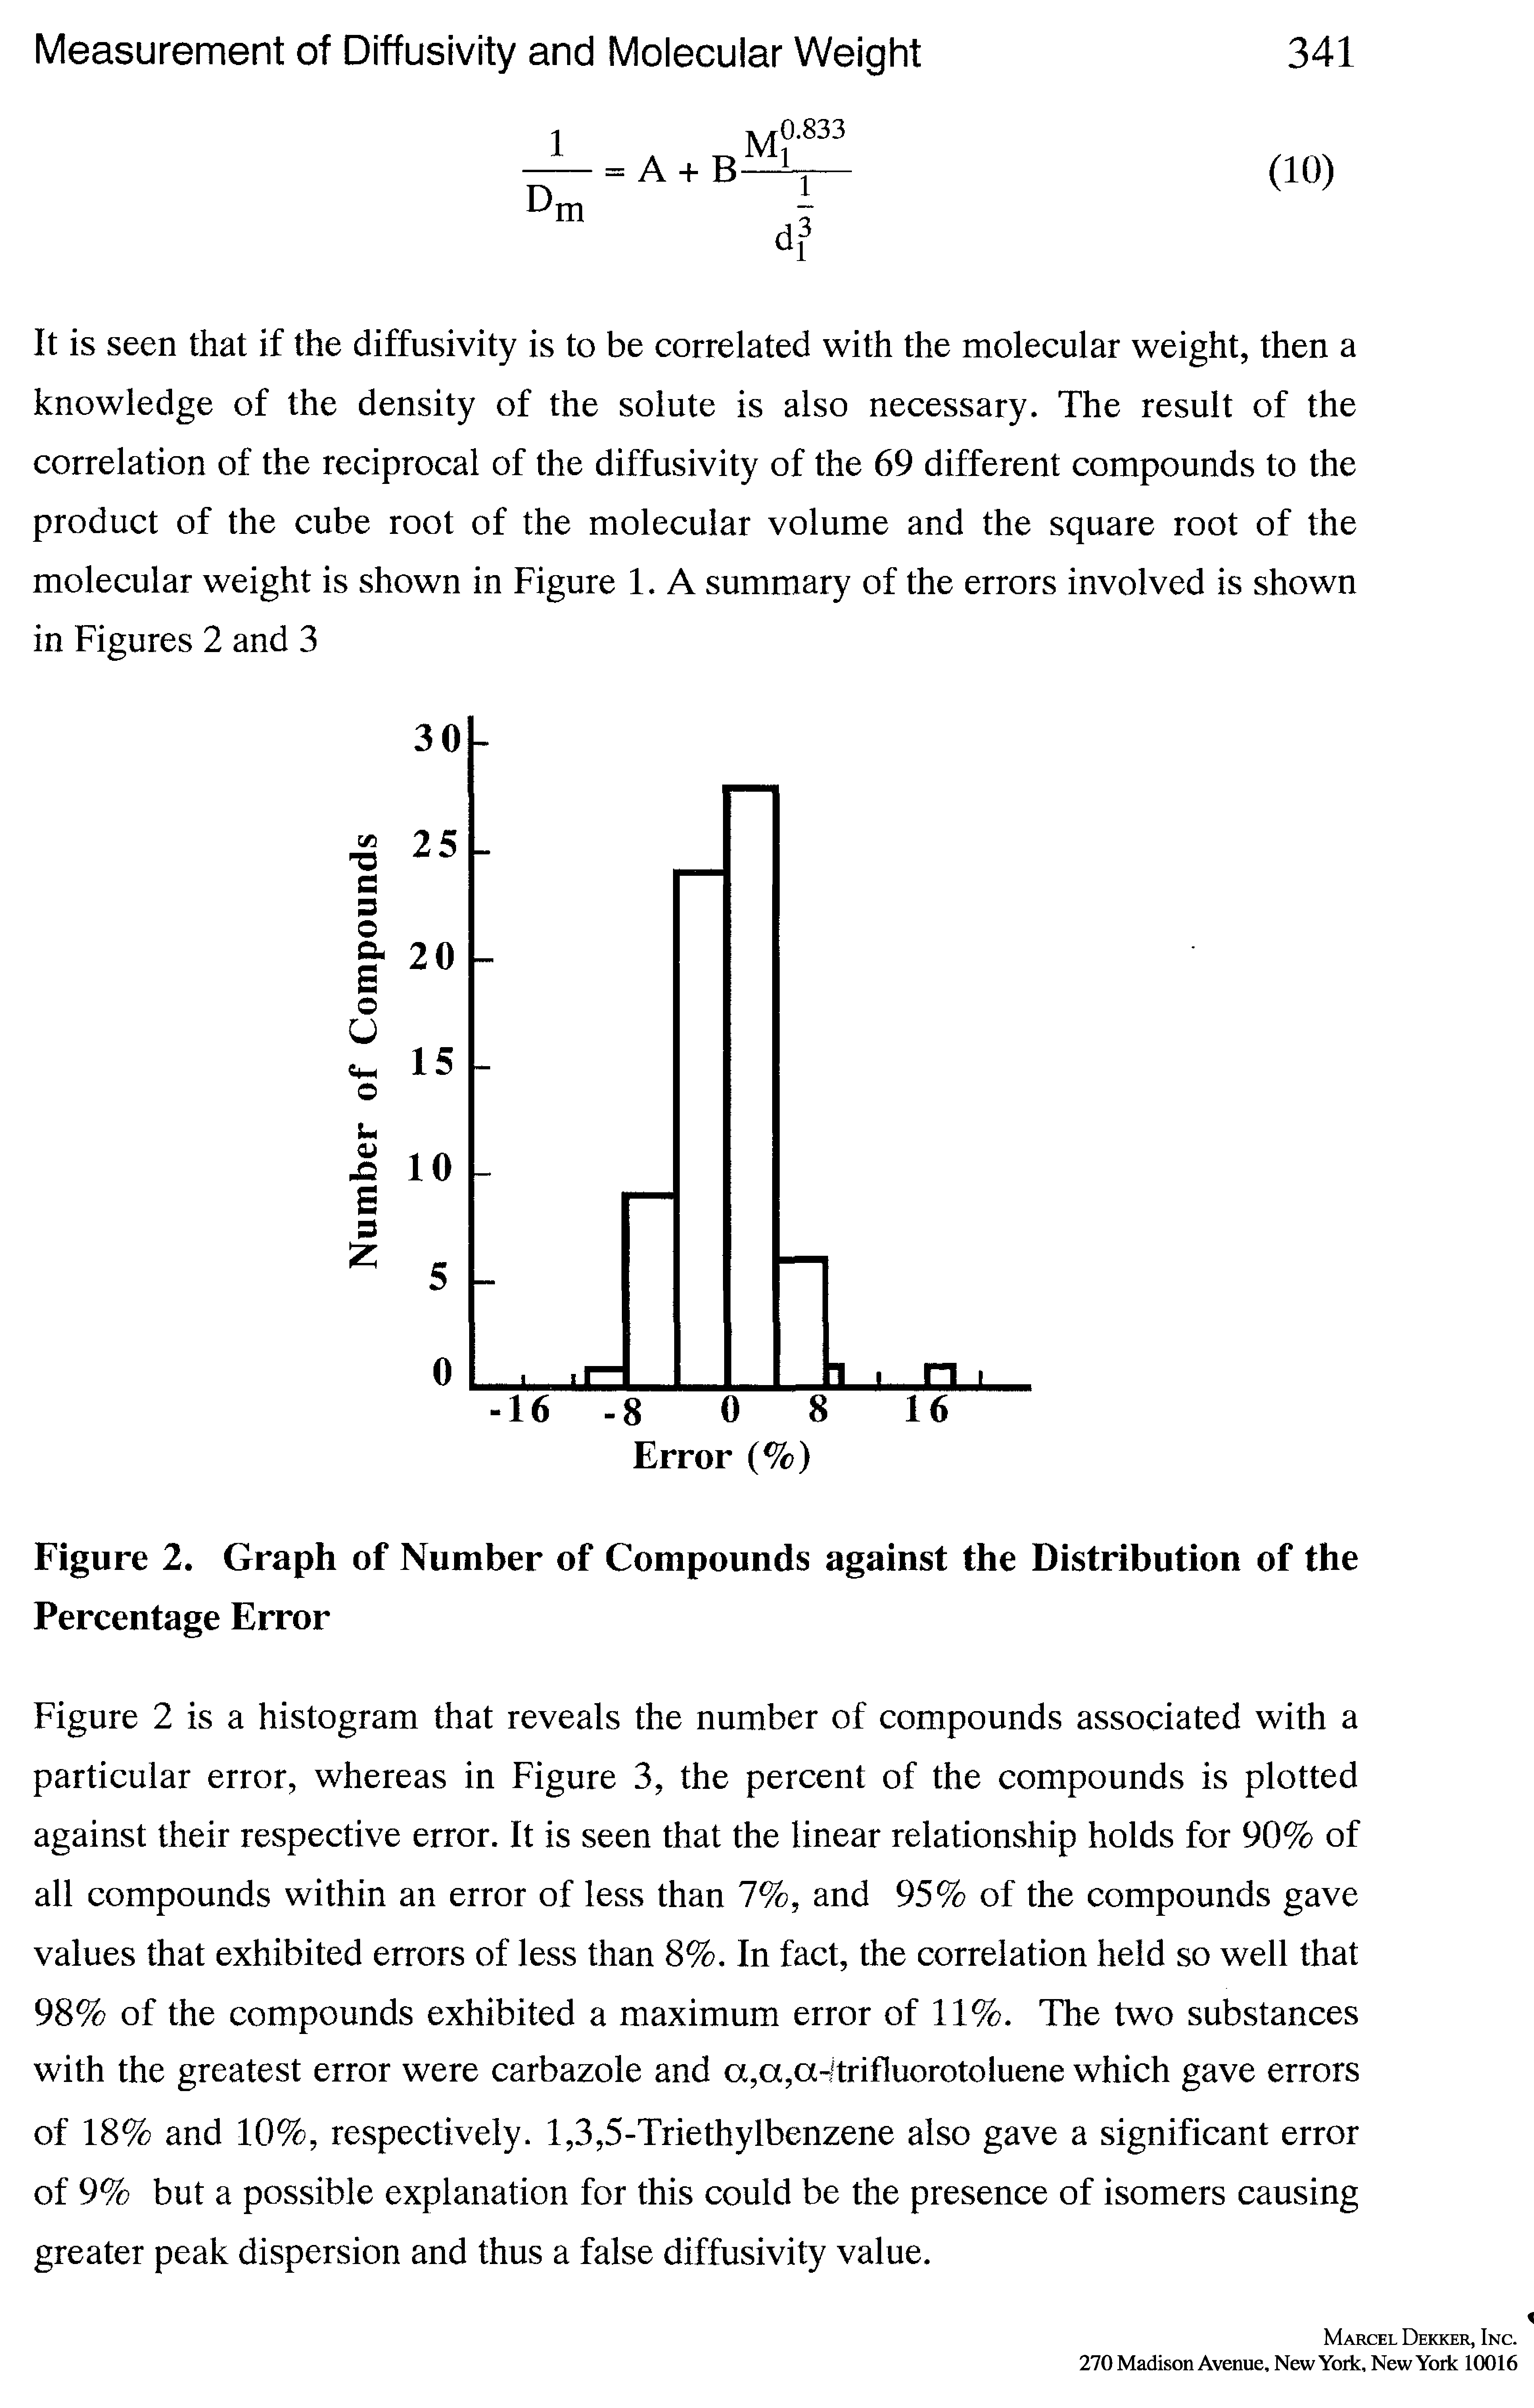 Figure 2. Graph of Number of Compounds against the Distribution of the Percentage Error...